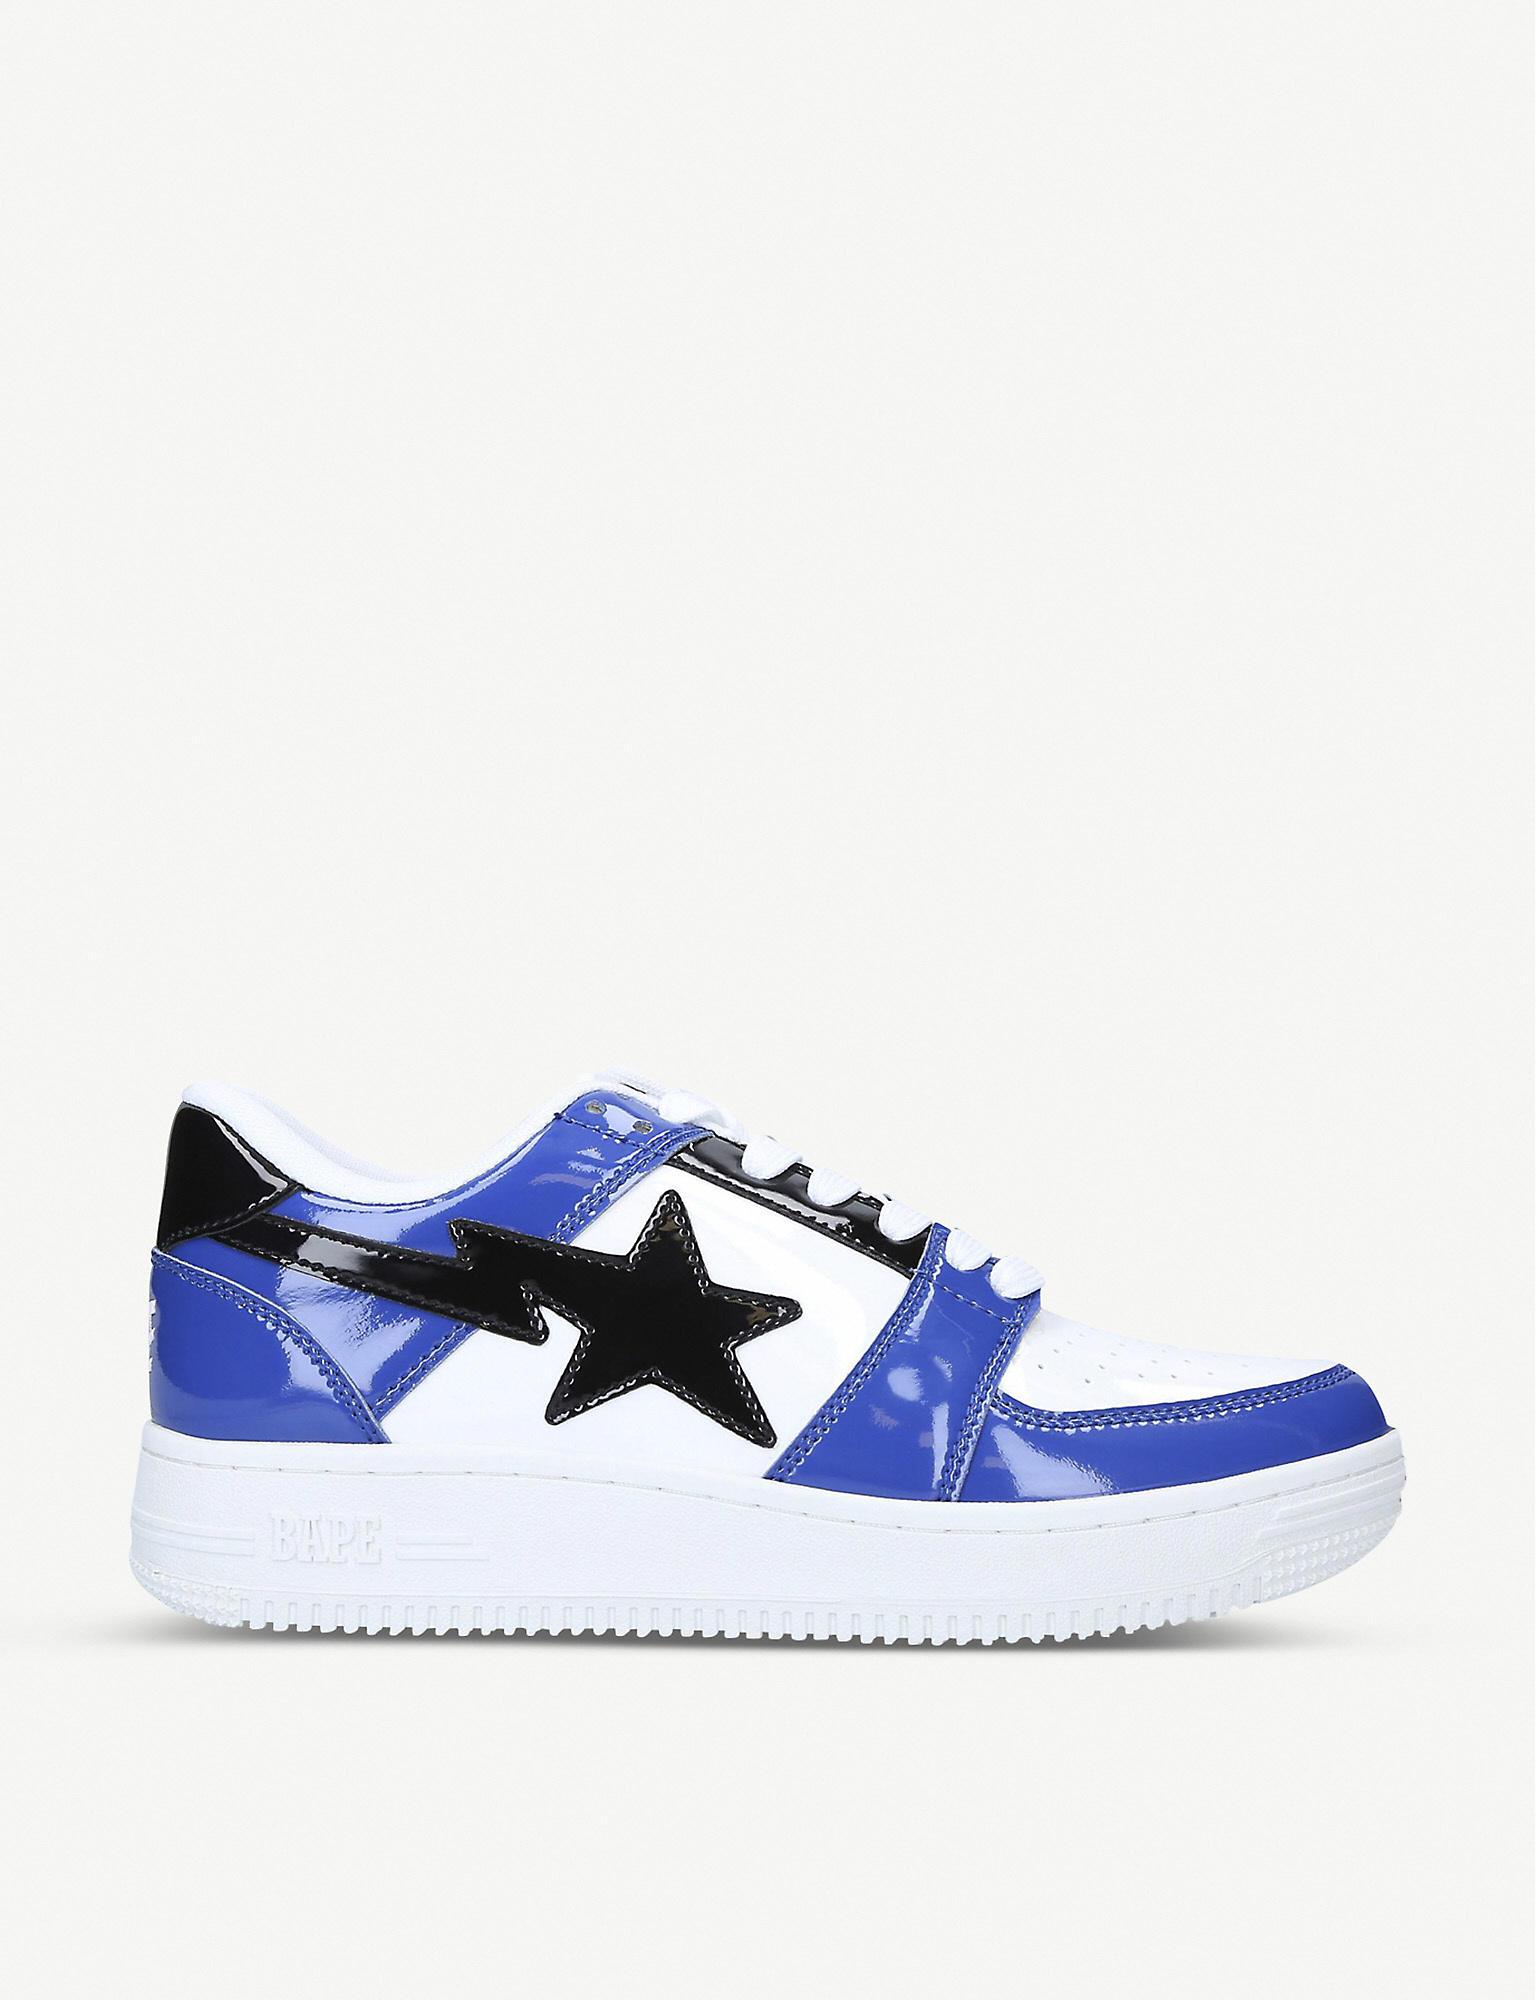 A Bathing Ape Bapesta Shooting Star Leather Trainers in Blue for Men - Lyst